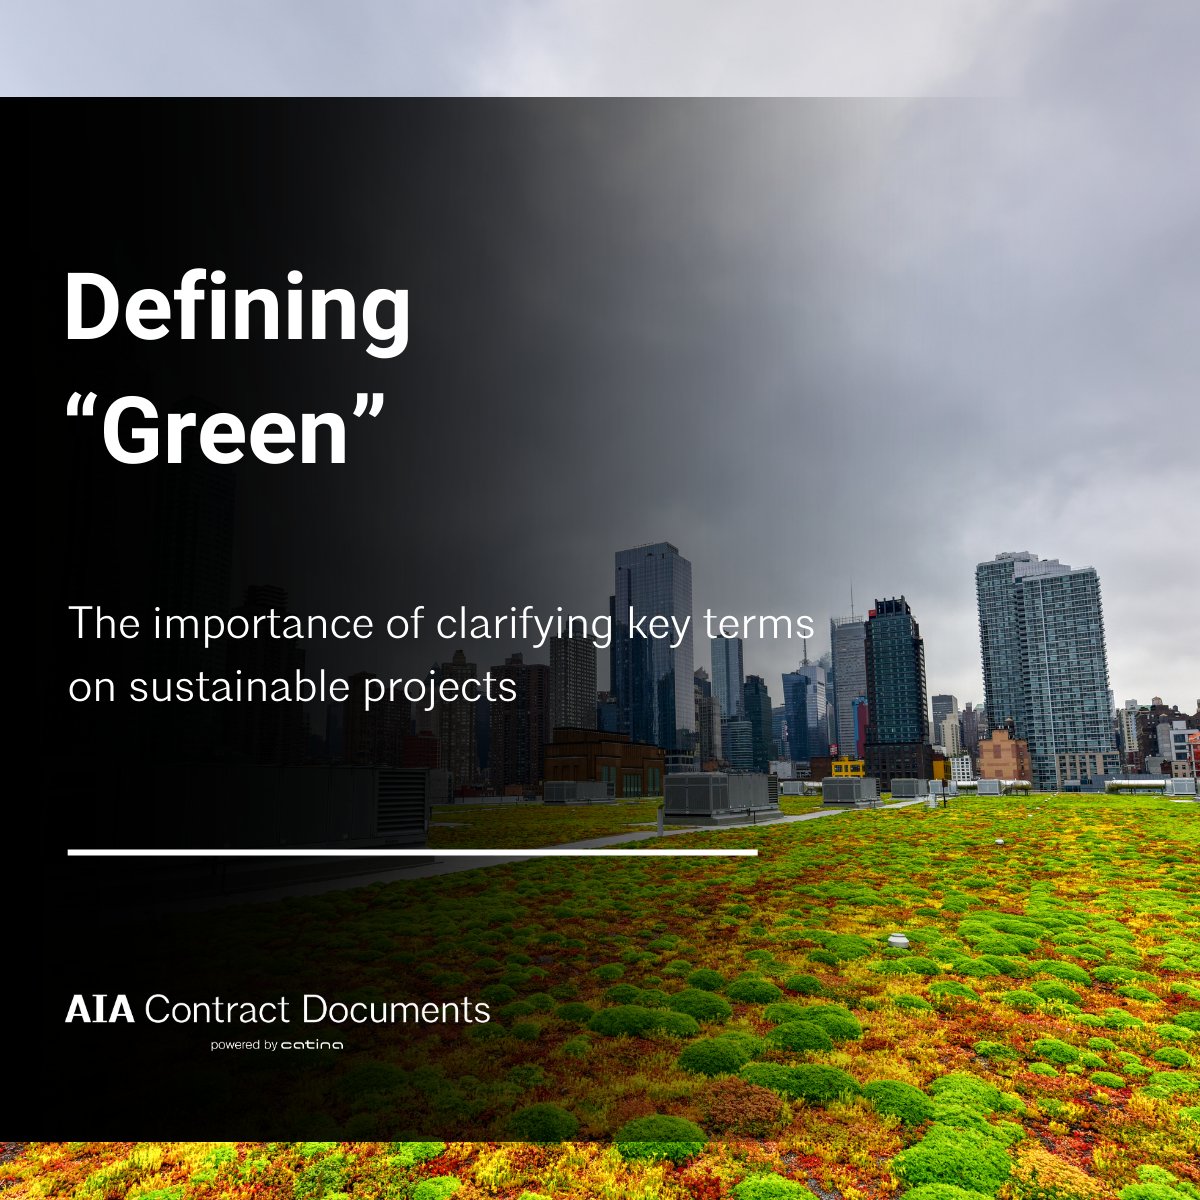 To avoid the risk of unmet or misaligned expectations on sustainable projects, it is important to clearly define key terms. This can also help mitigate confusion and regulatory scrutiny. bit.ly/4bZBisU #GreenBuilding #SustainableConstruction